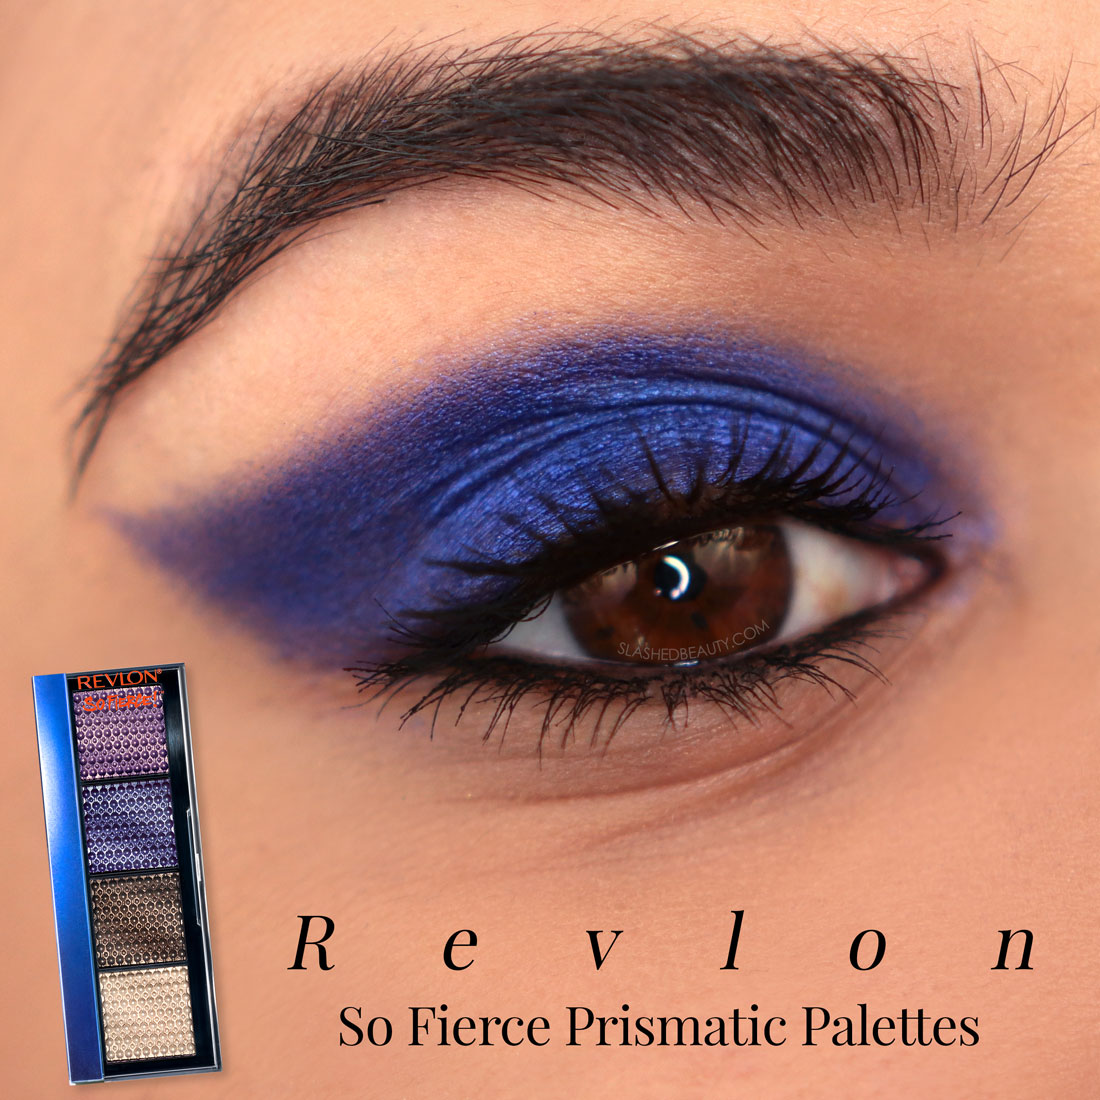 Close up of eye wearing the metallic blues hade from Revlon's Clap Back palette | The Best Eyeshadows for One and Done Looks | Slashed Beauty